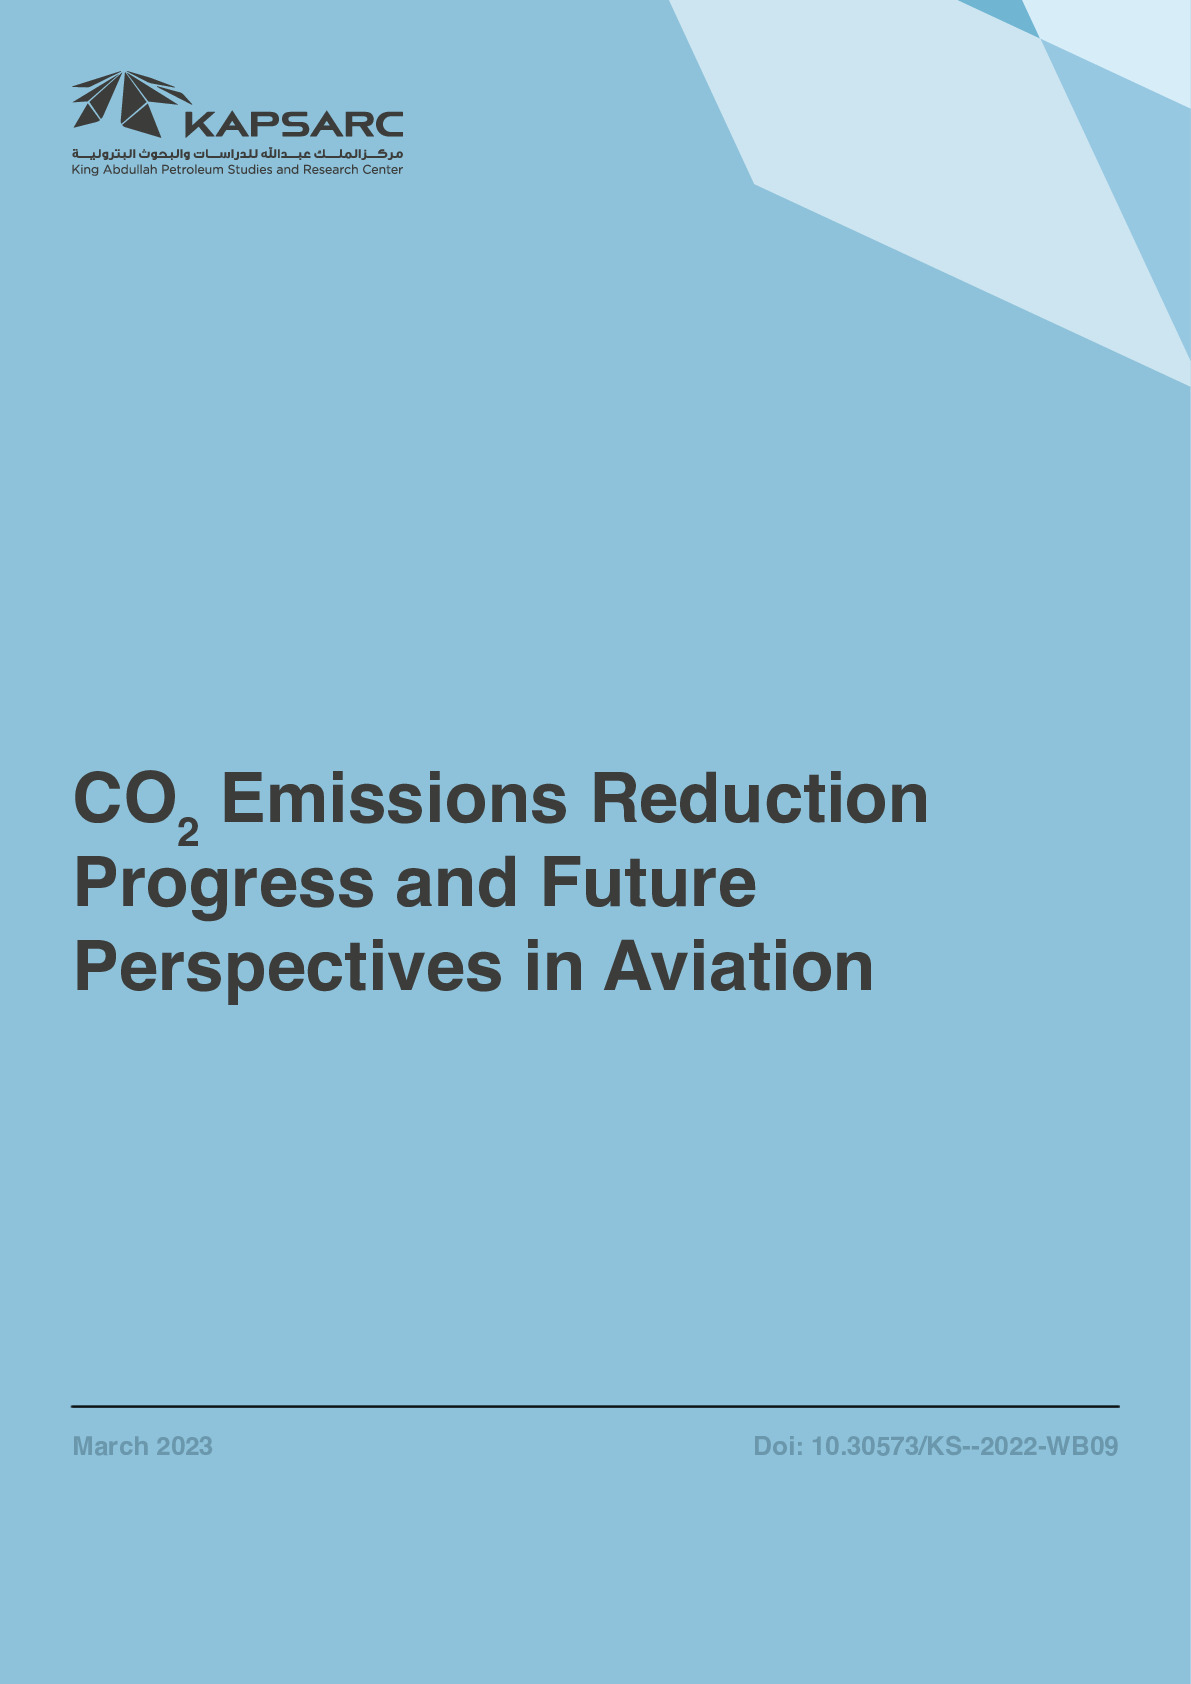 CO2 Emissions Reduction Progress and Future Perspectives in Aviation